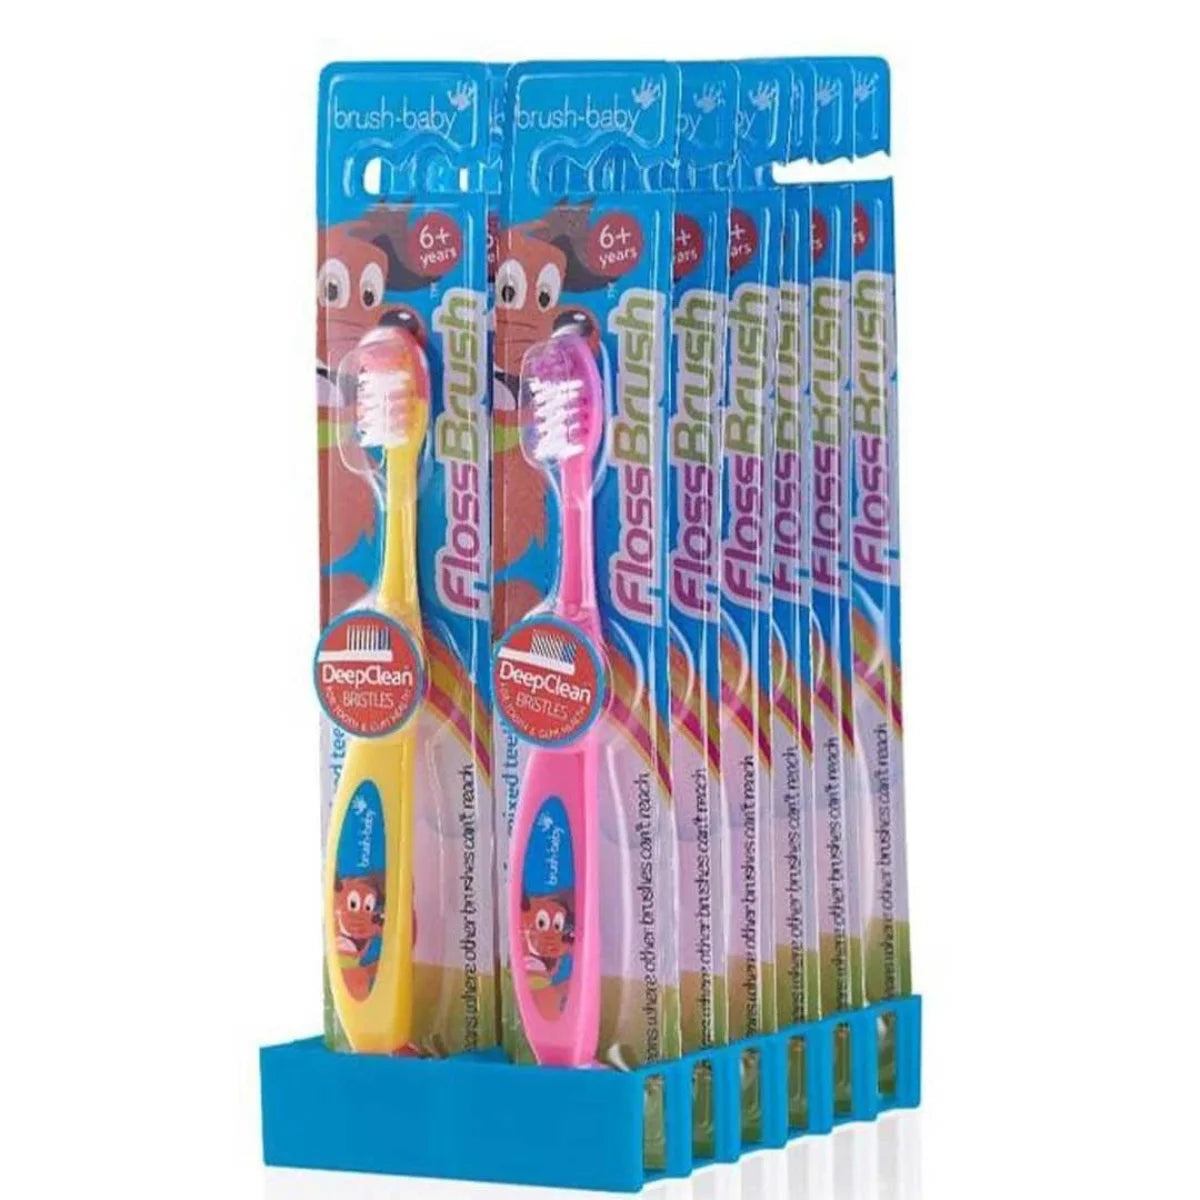 floss bristles toothbrush best childrens toothbrush 6years+ multi coloured value pack in pink, yellow, blue and purple